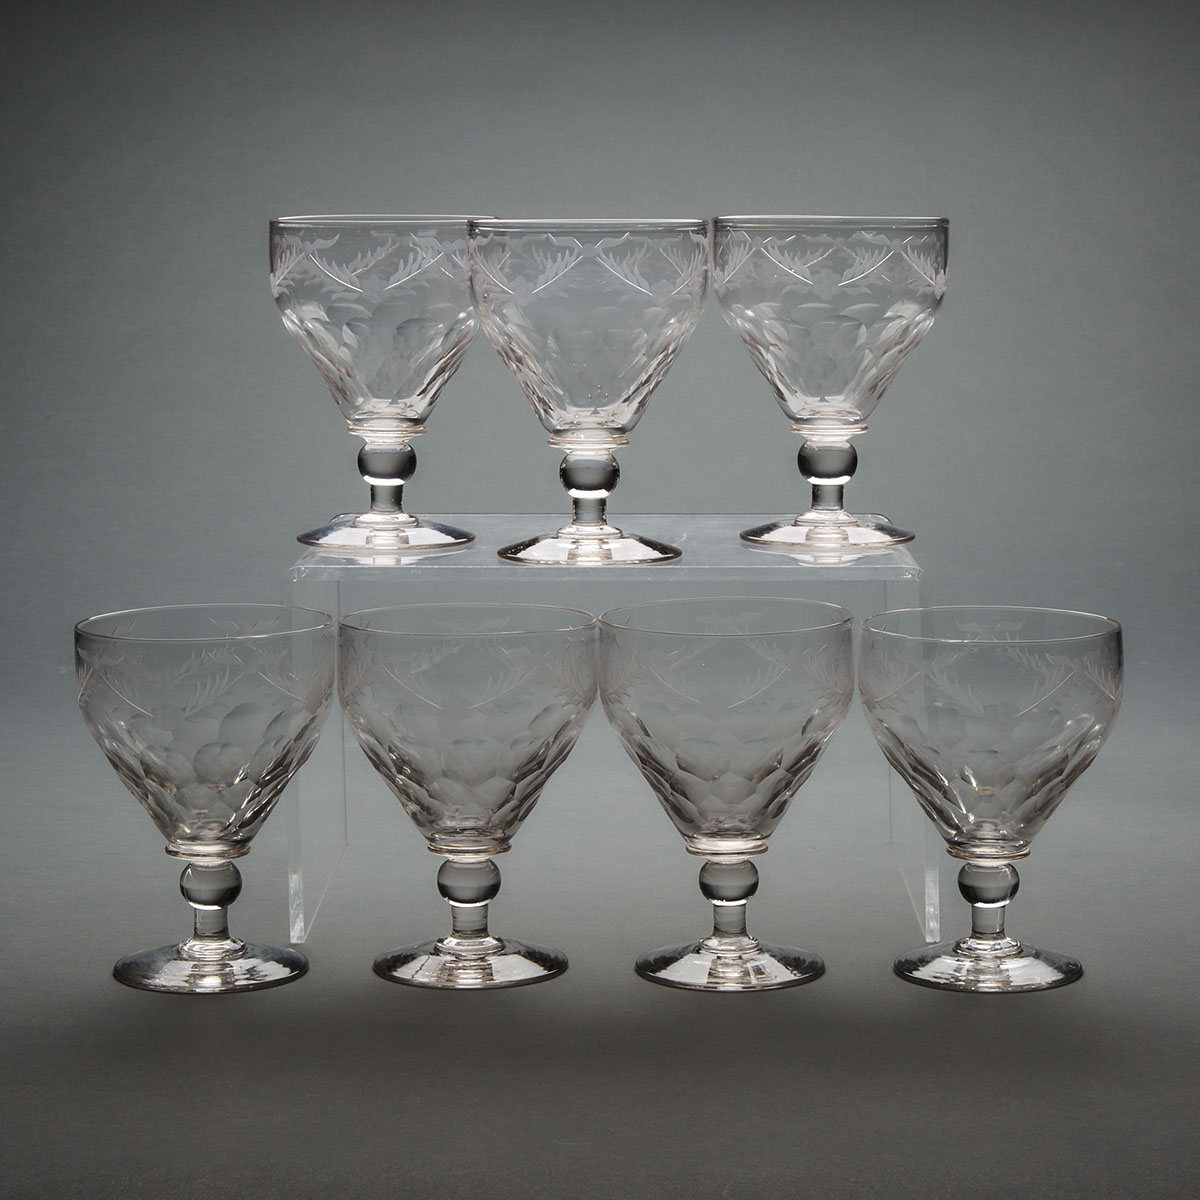 Seven English Cut and Engraved Glass Rummers, 19th century